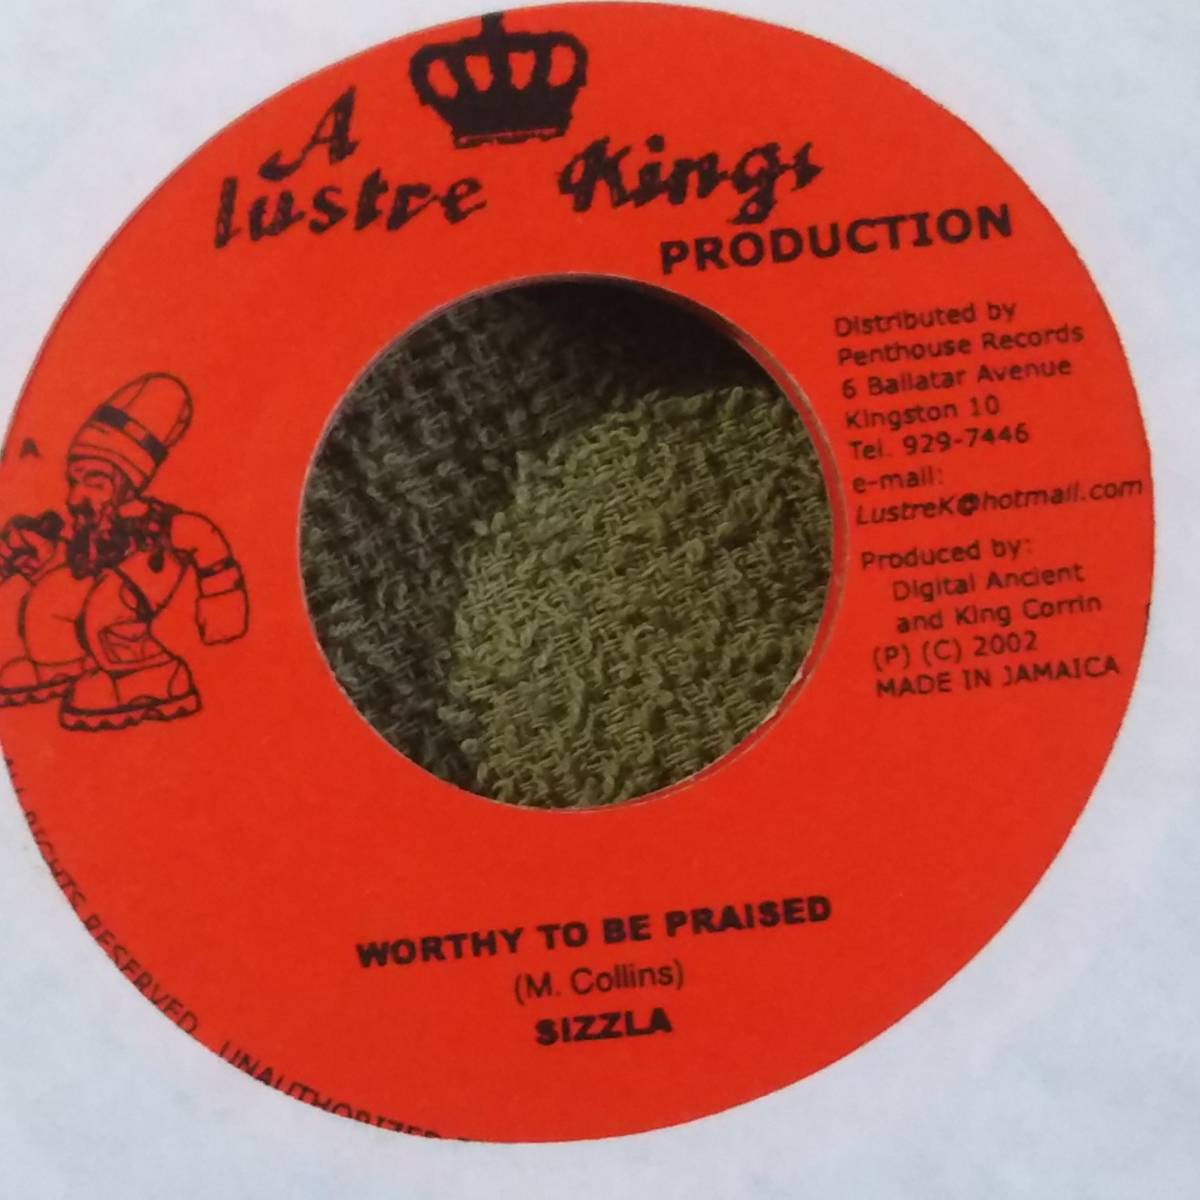 Don Carlos Track Re-Make Credential Riddim Single 3枚Set from A Luster Kings Sizzla Luciano Determine_画像1